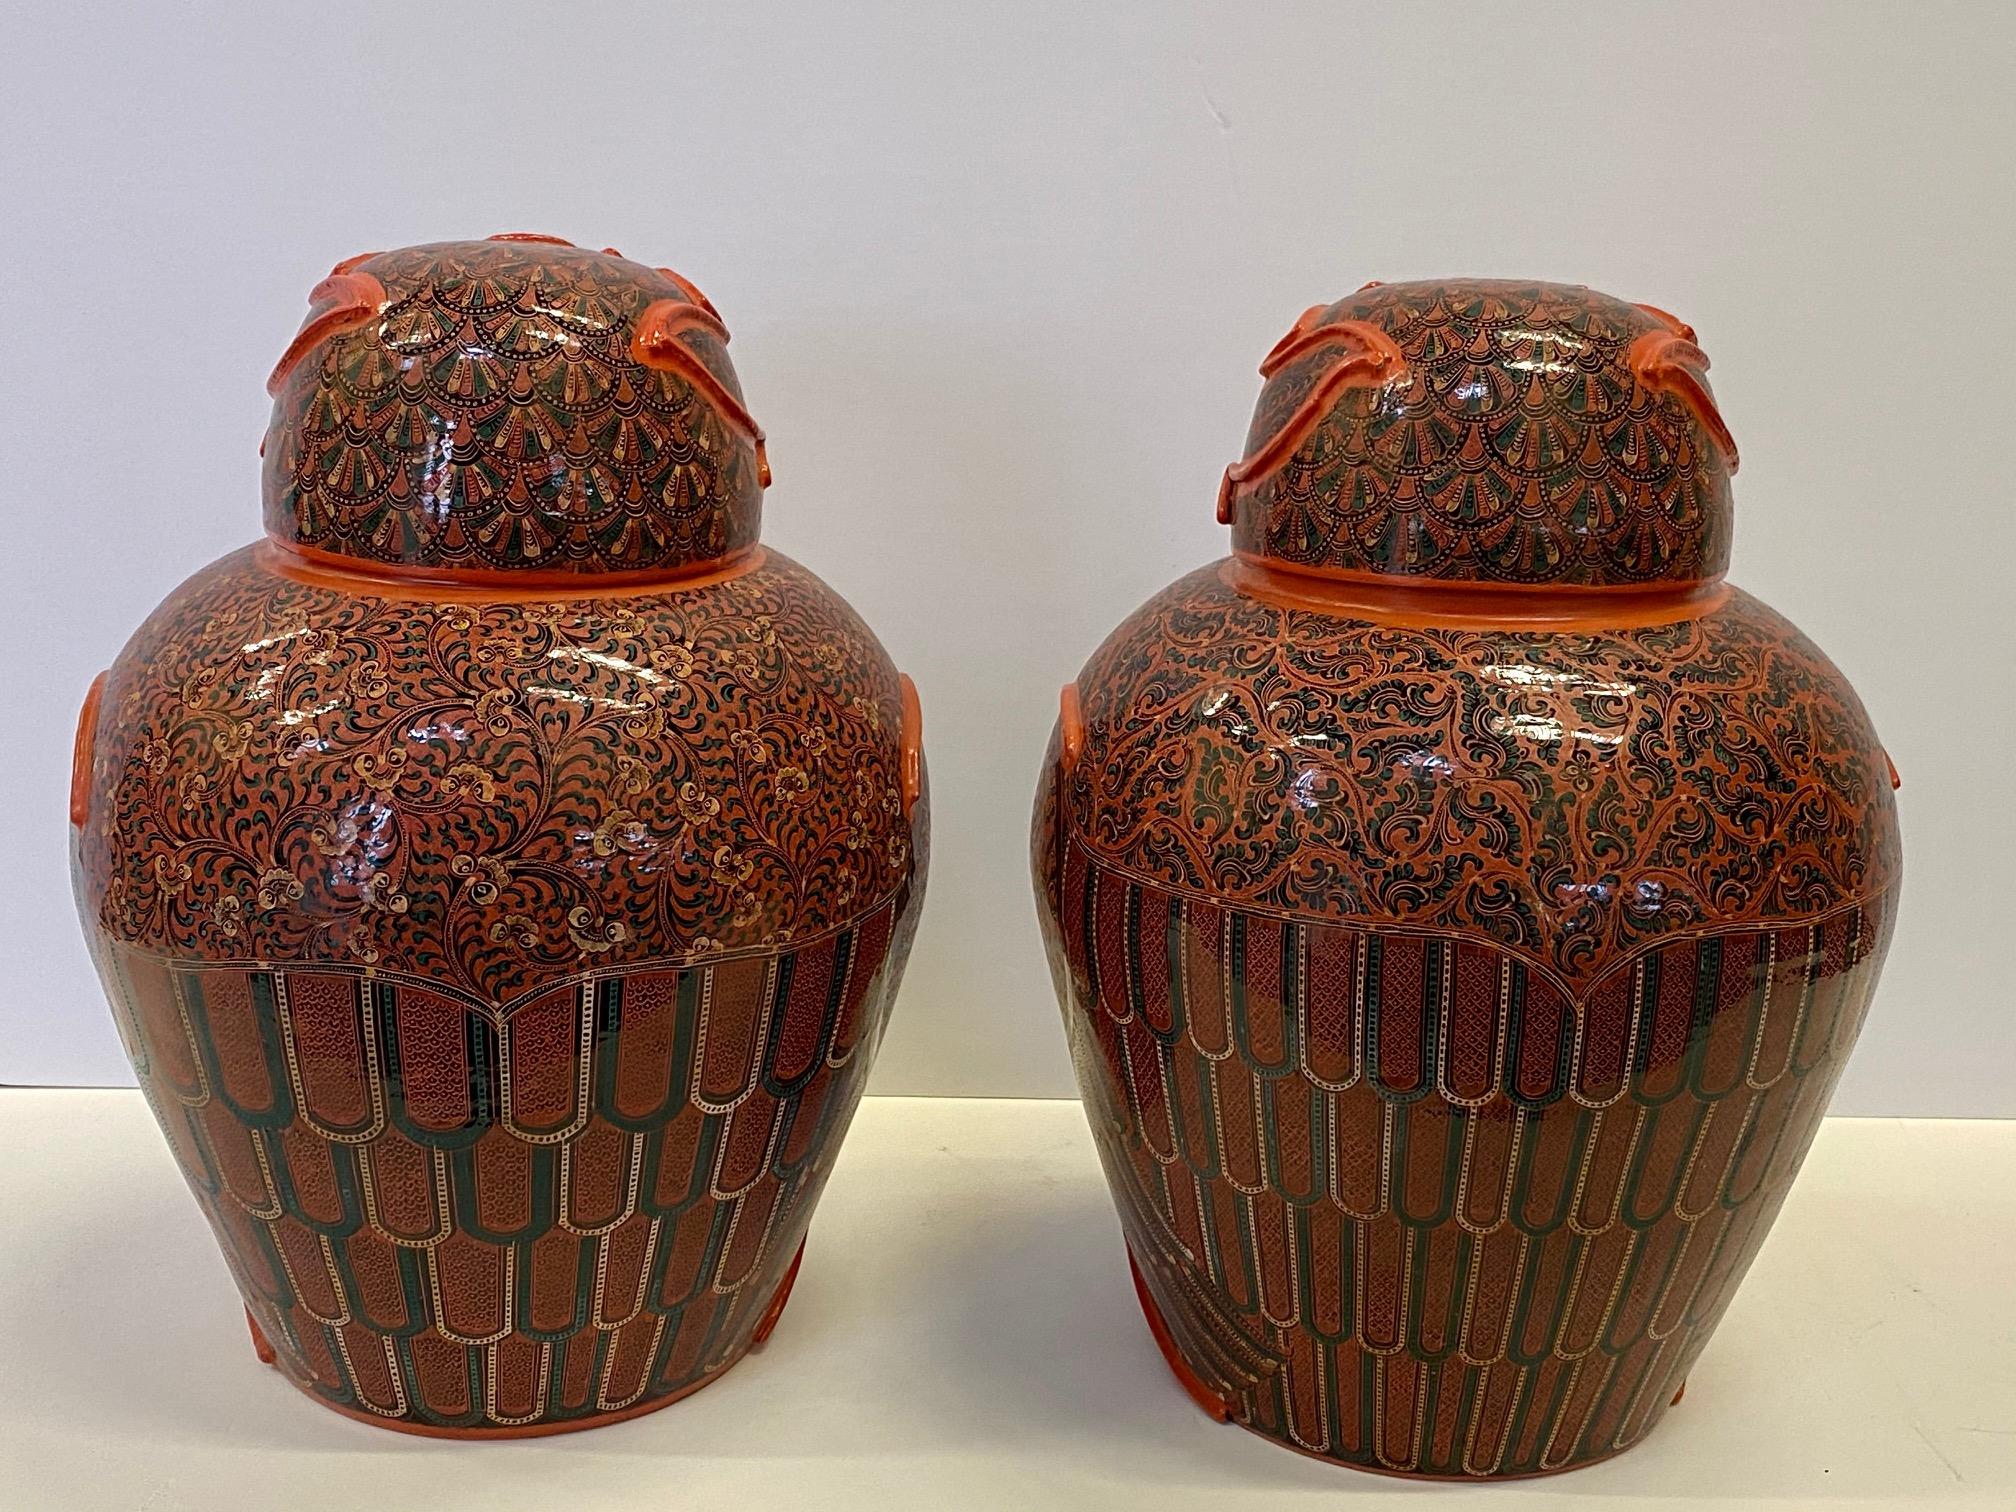 A marvelous pair of intricately hand painted Burmese owl jars with lids having an eye-catching color palette of red, green and orange lacquered papier mâché.